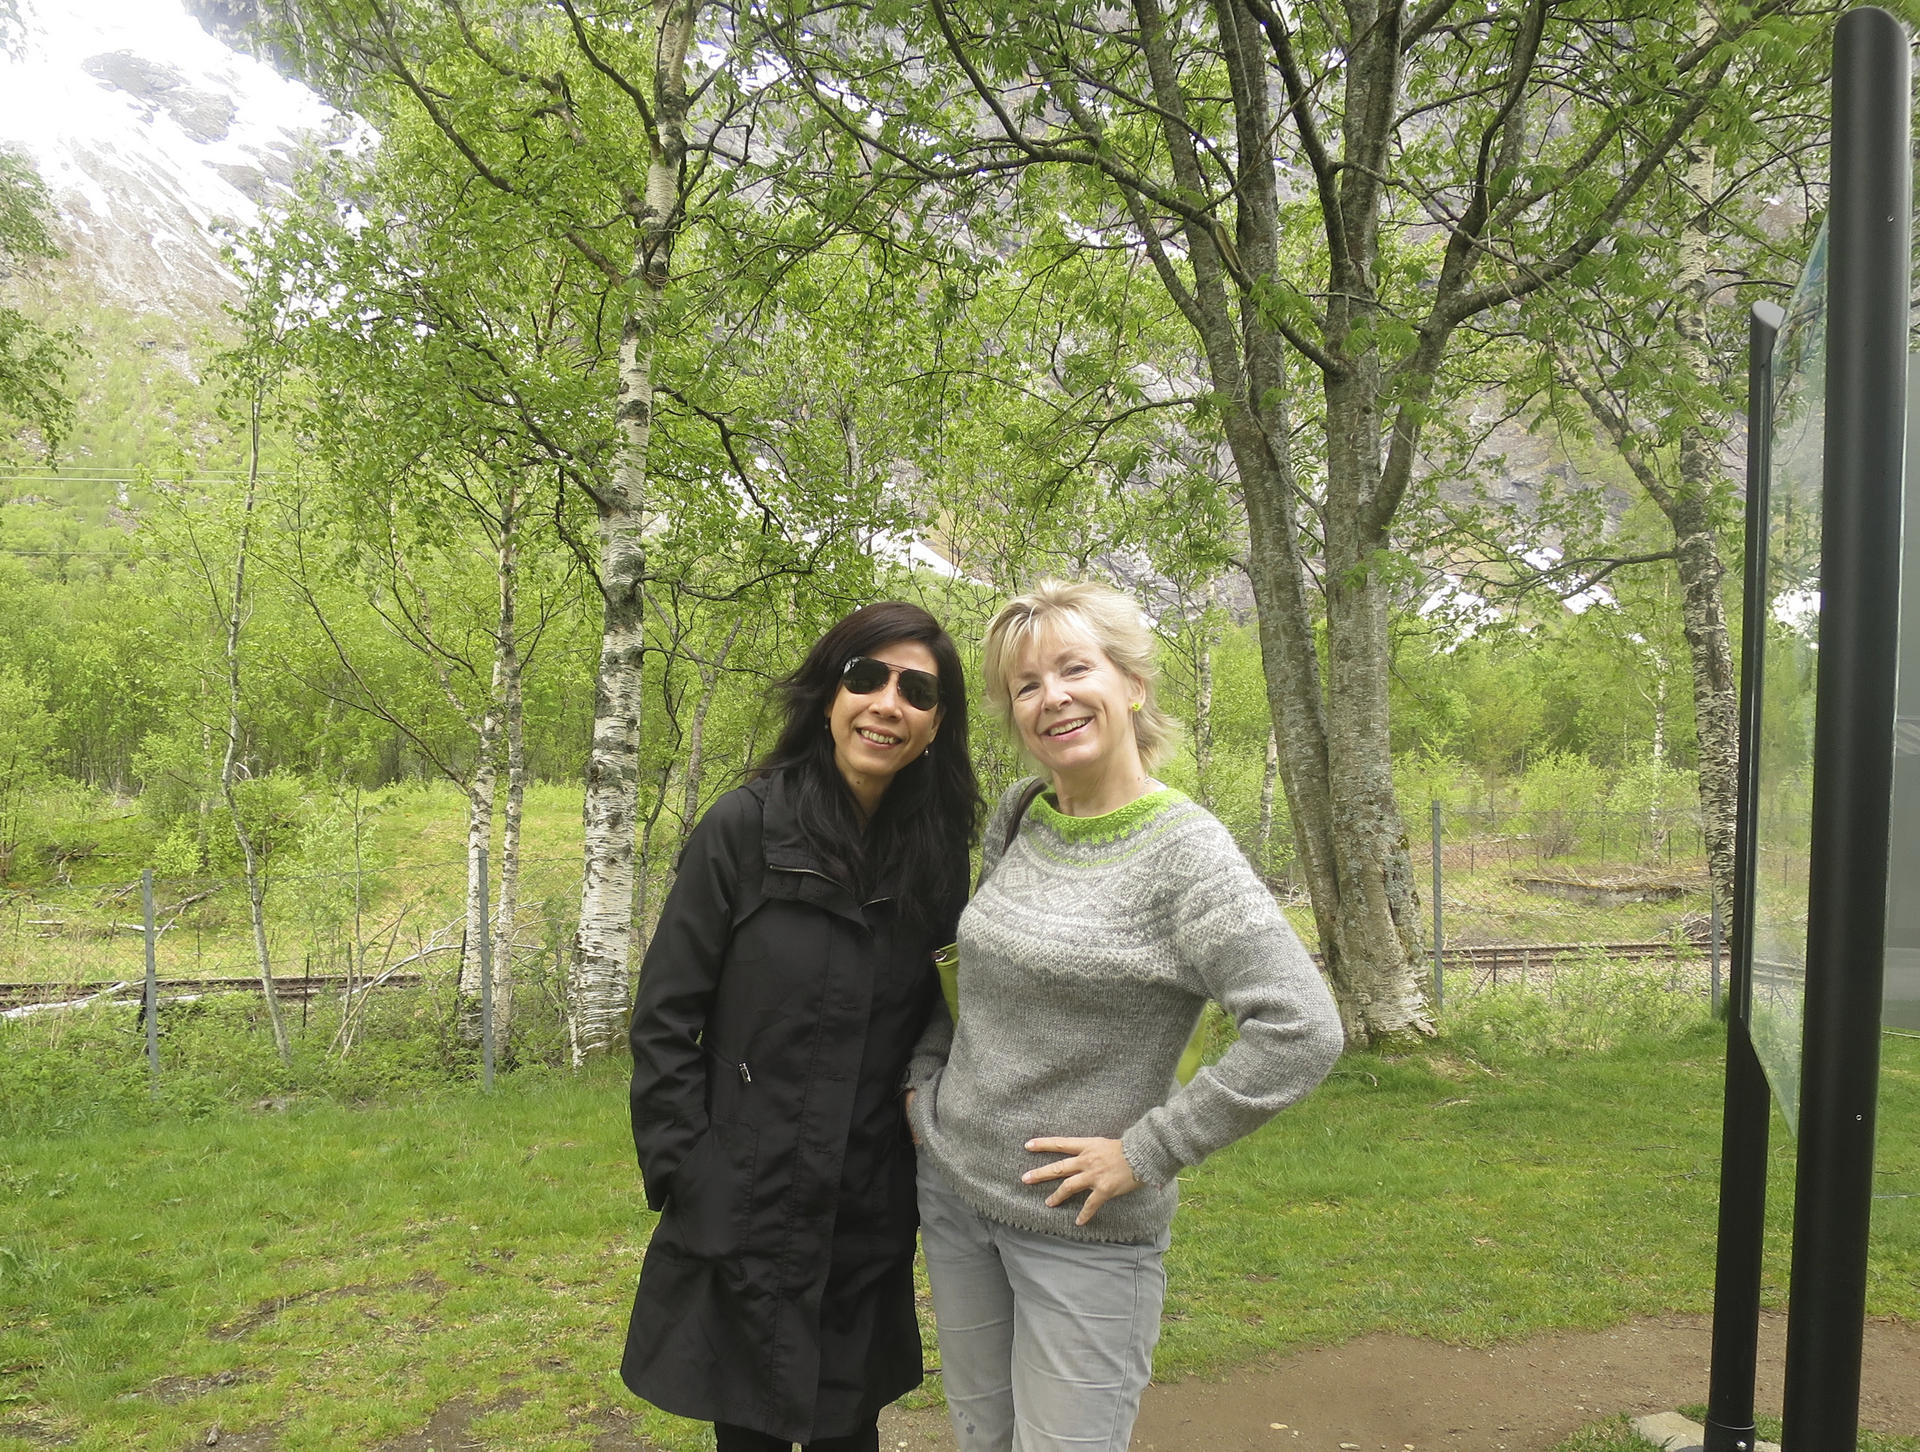 The writer with her Pui O "neighbour" Miss Chan at the Troll Wall, in Norway.